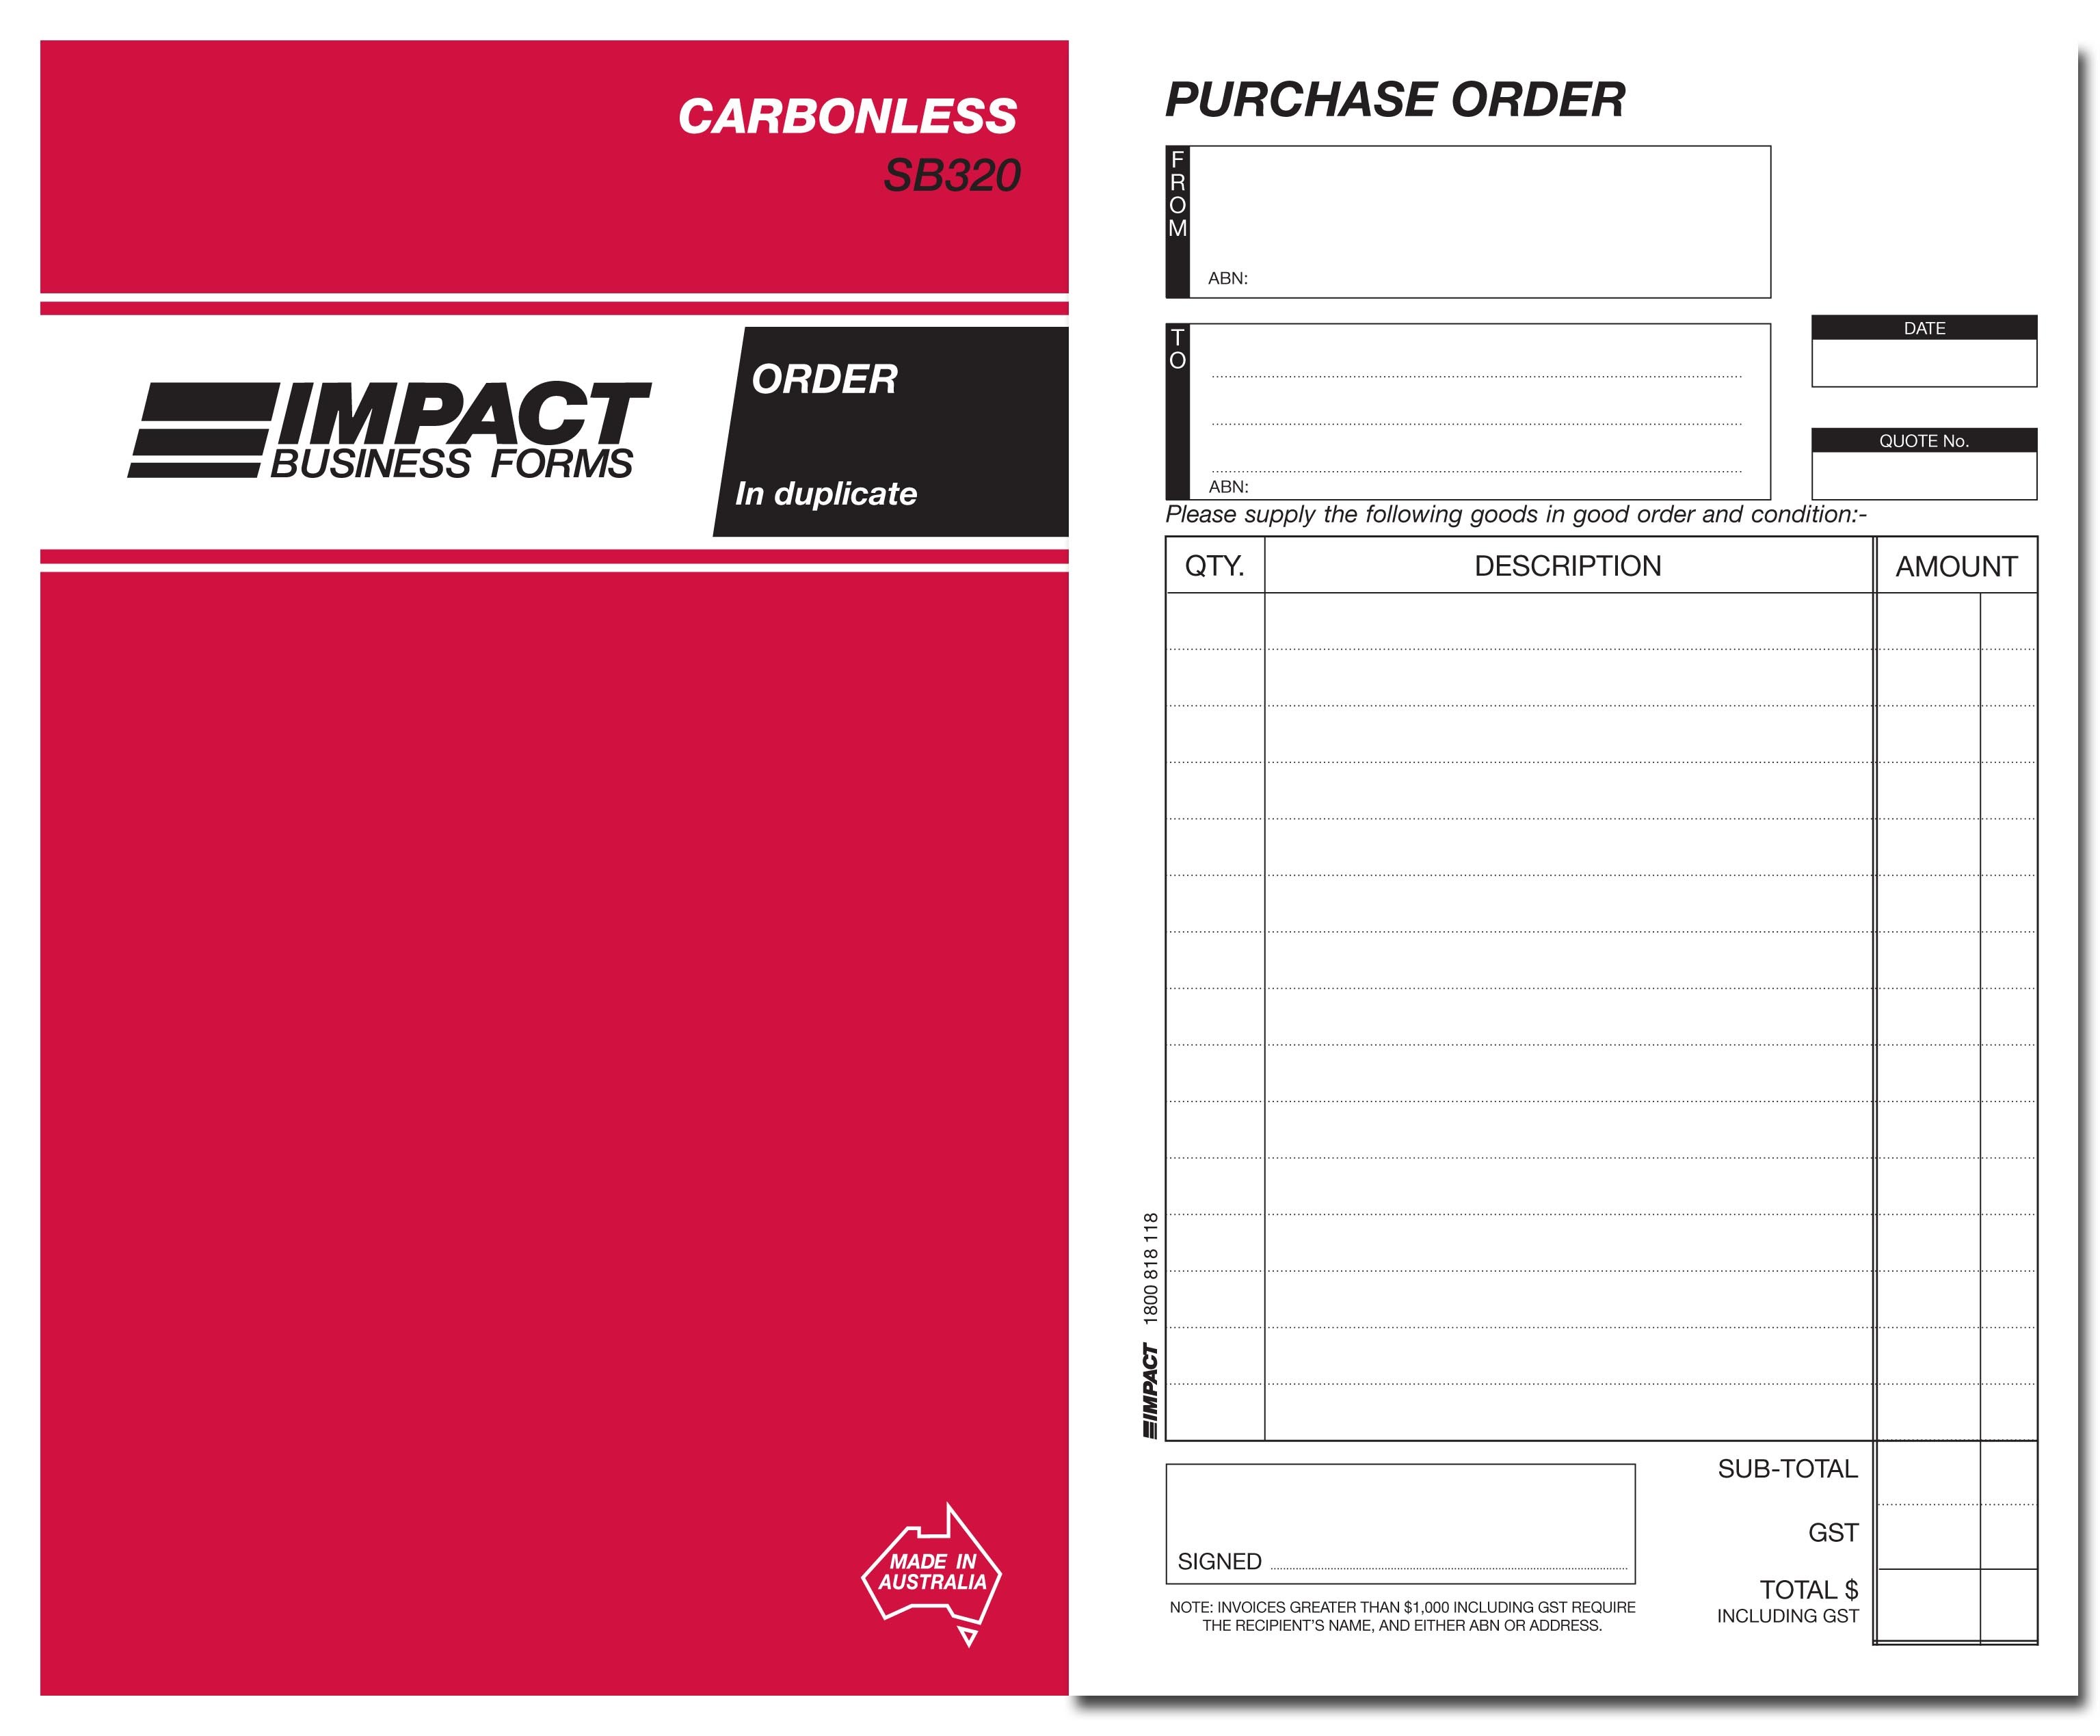 IMPACT CARBONLESS PURCHASE ORDER BOOK DUP. (8x5) SB-320 (price excludes gst)